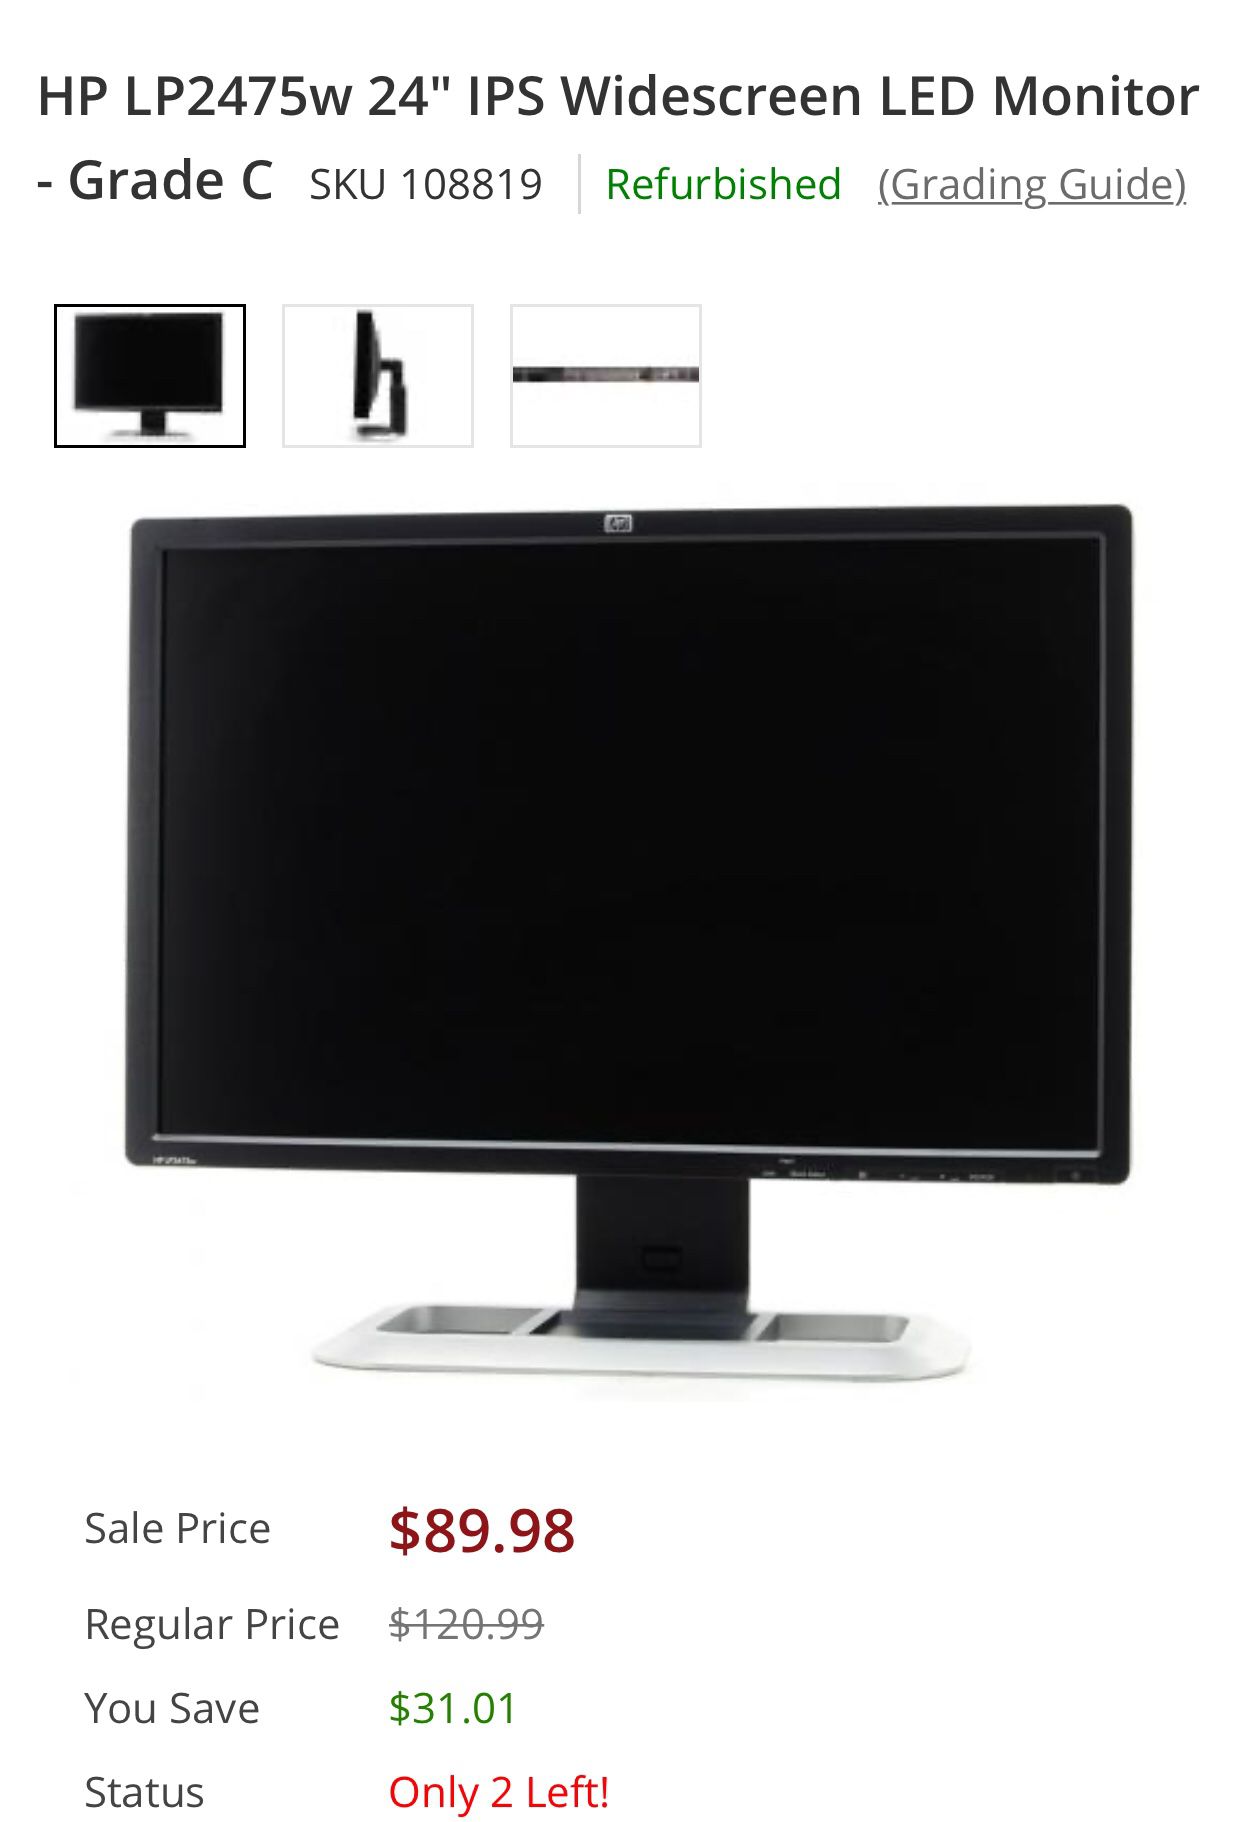 HP LP2475w 24 inch IPS Widescreen LED Monitor